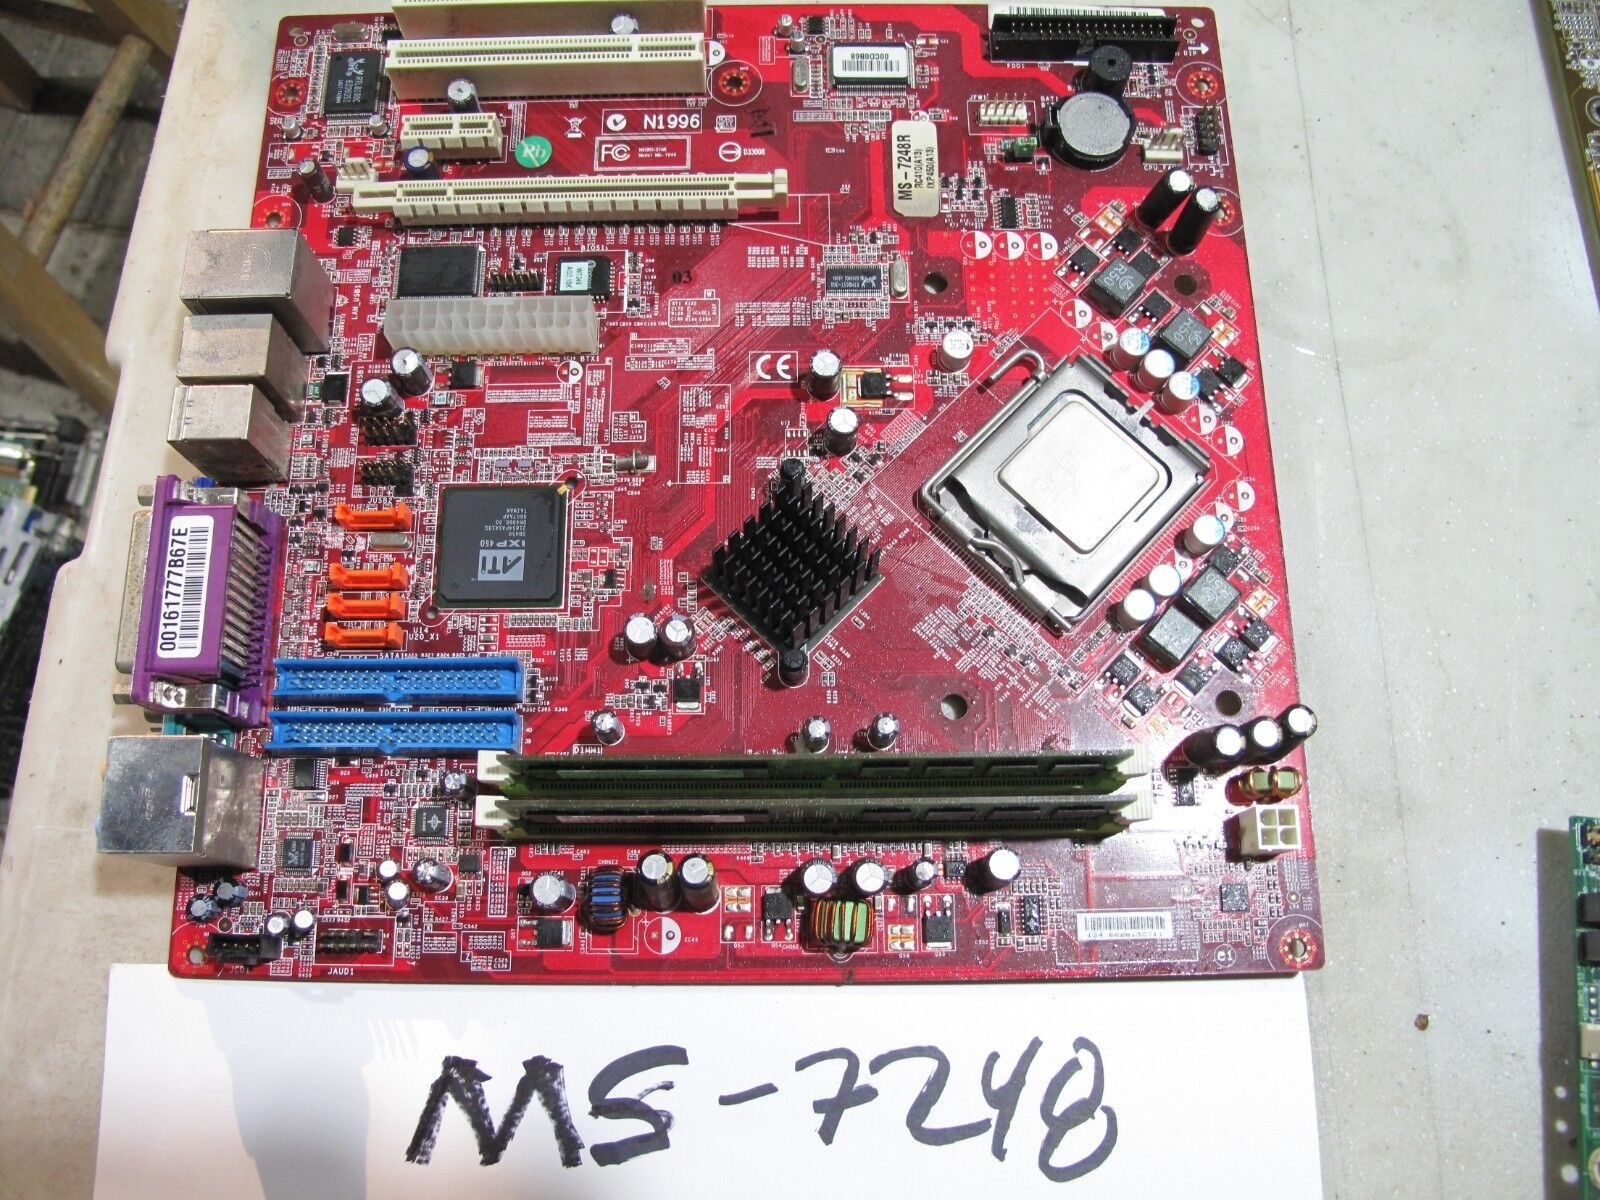 MSI MS-7248 MOTHERBOARD WITH 2.66GHz SL8ZH CPU + 1GB RAM - $32.71